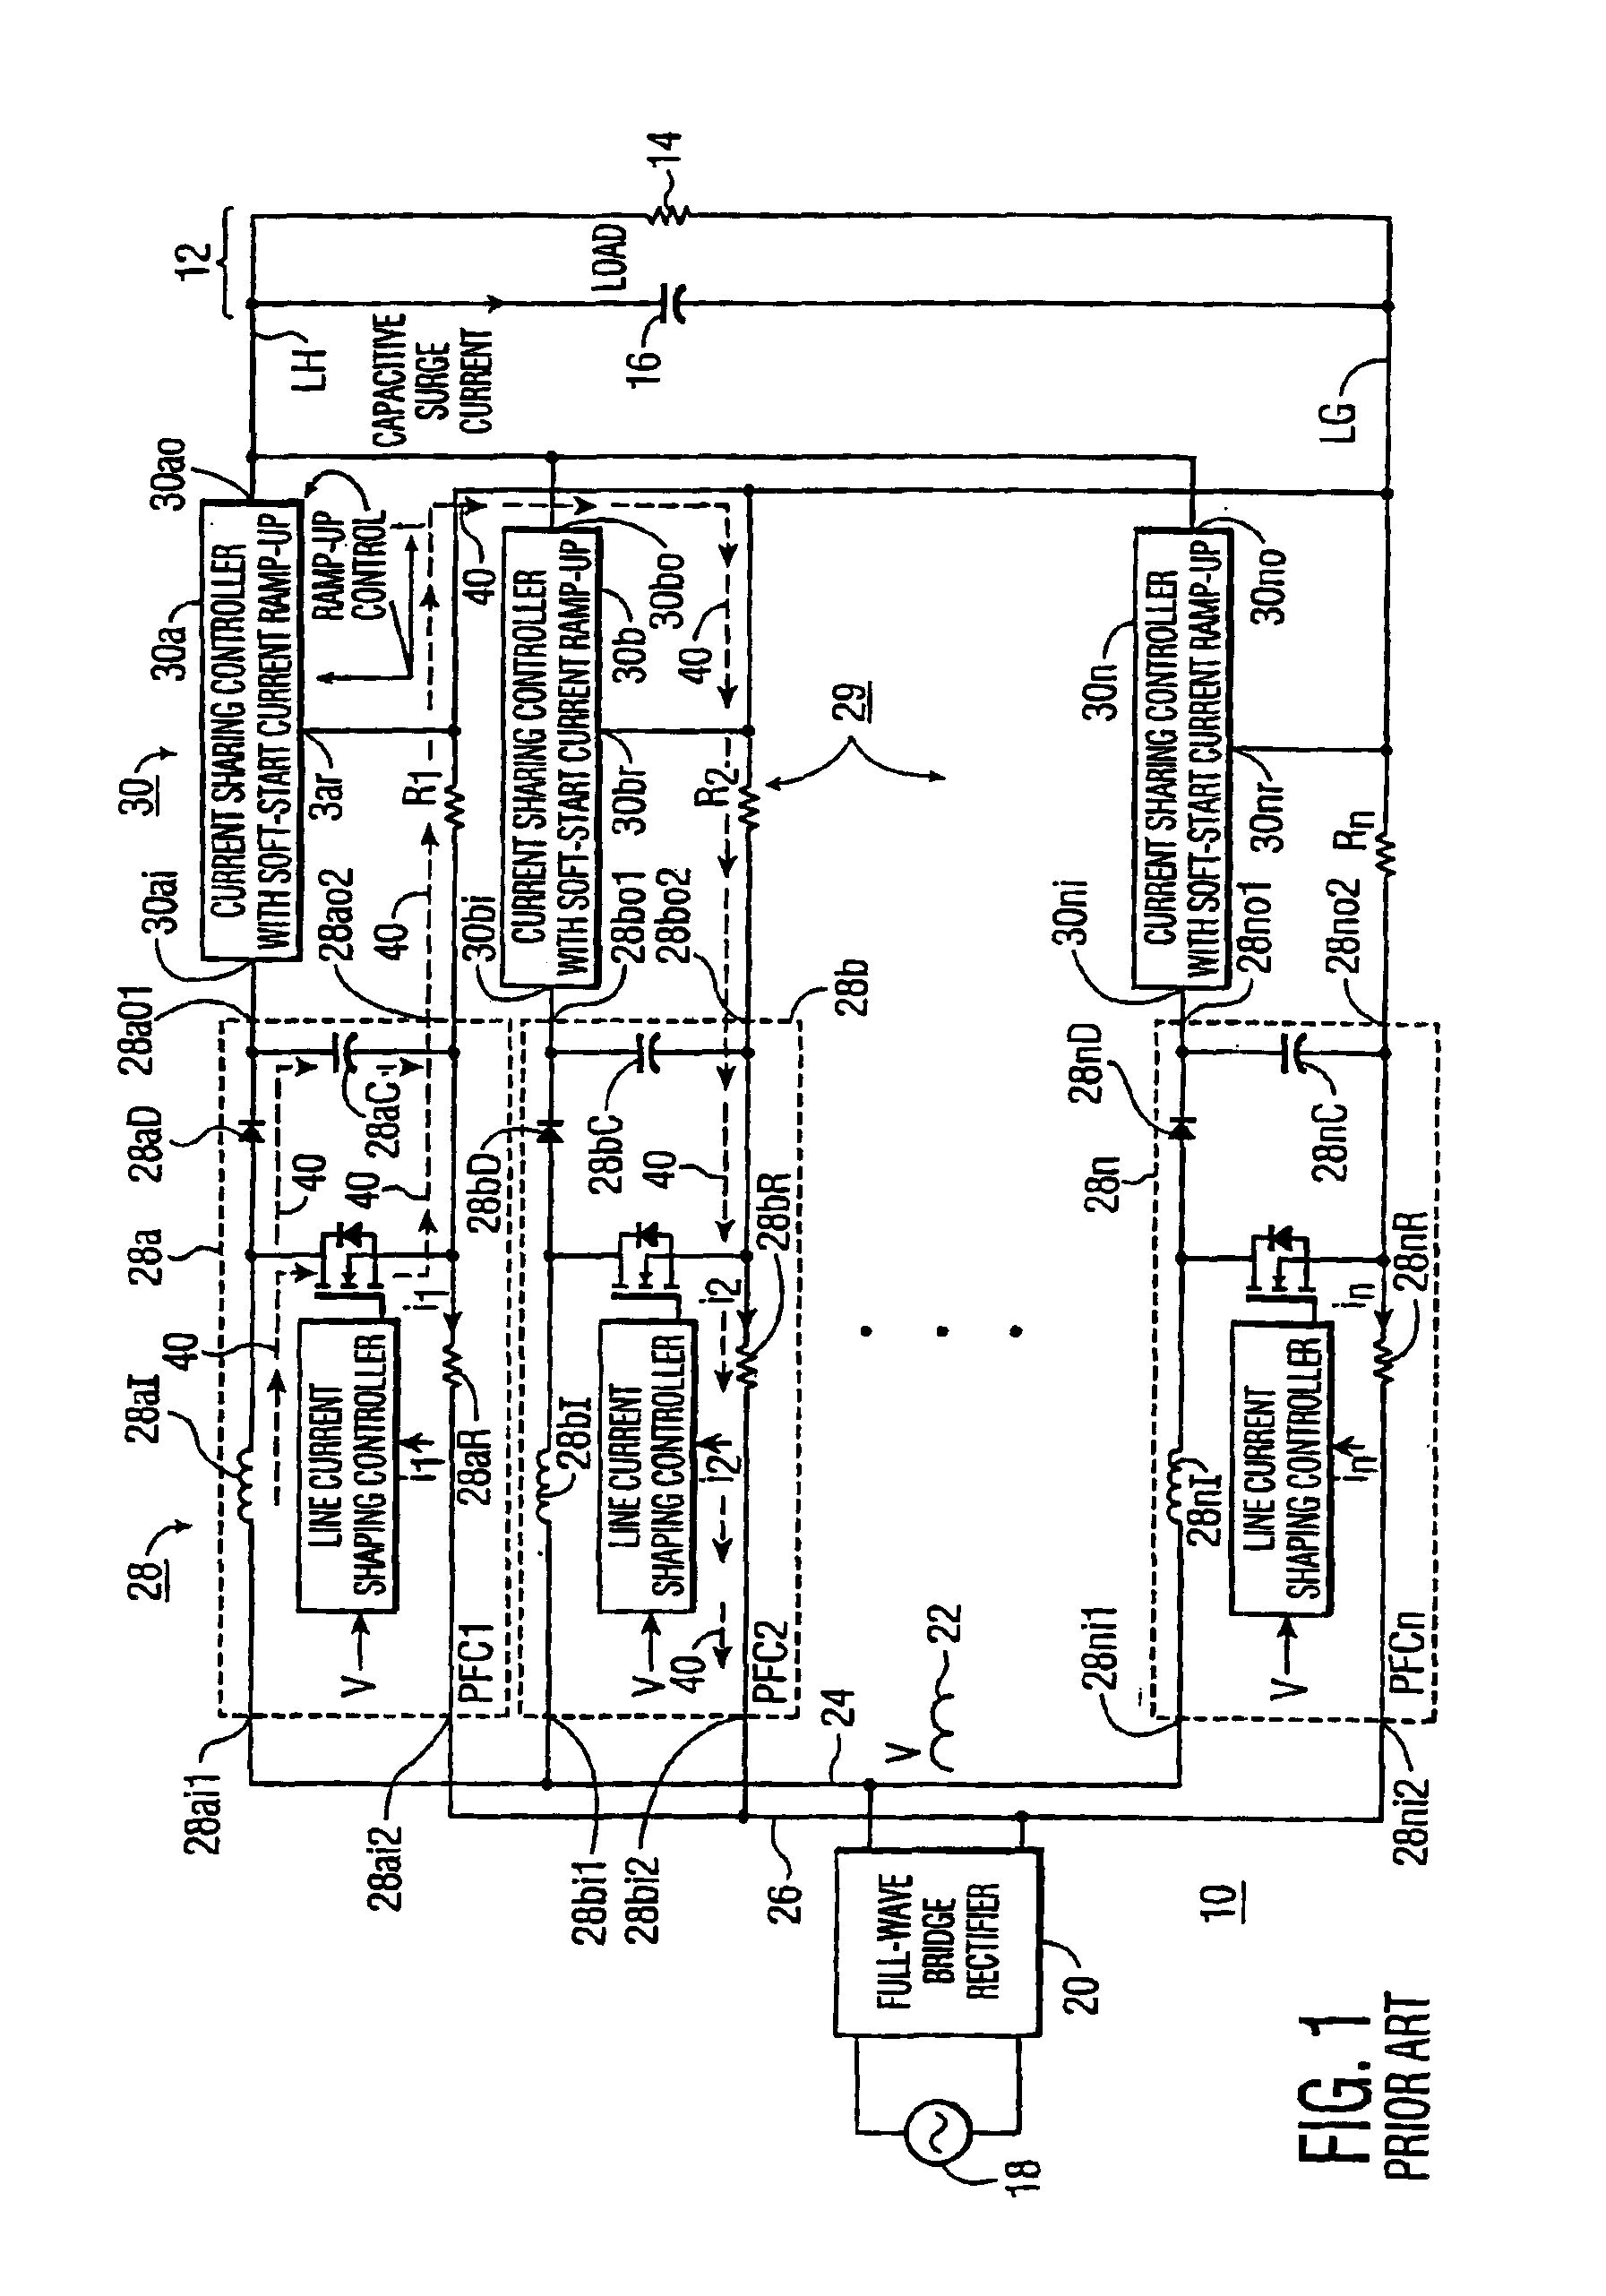 Paralleled power factor correcting AC-to-DC converters with improved current balance